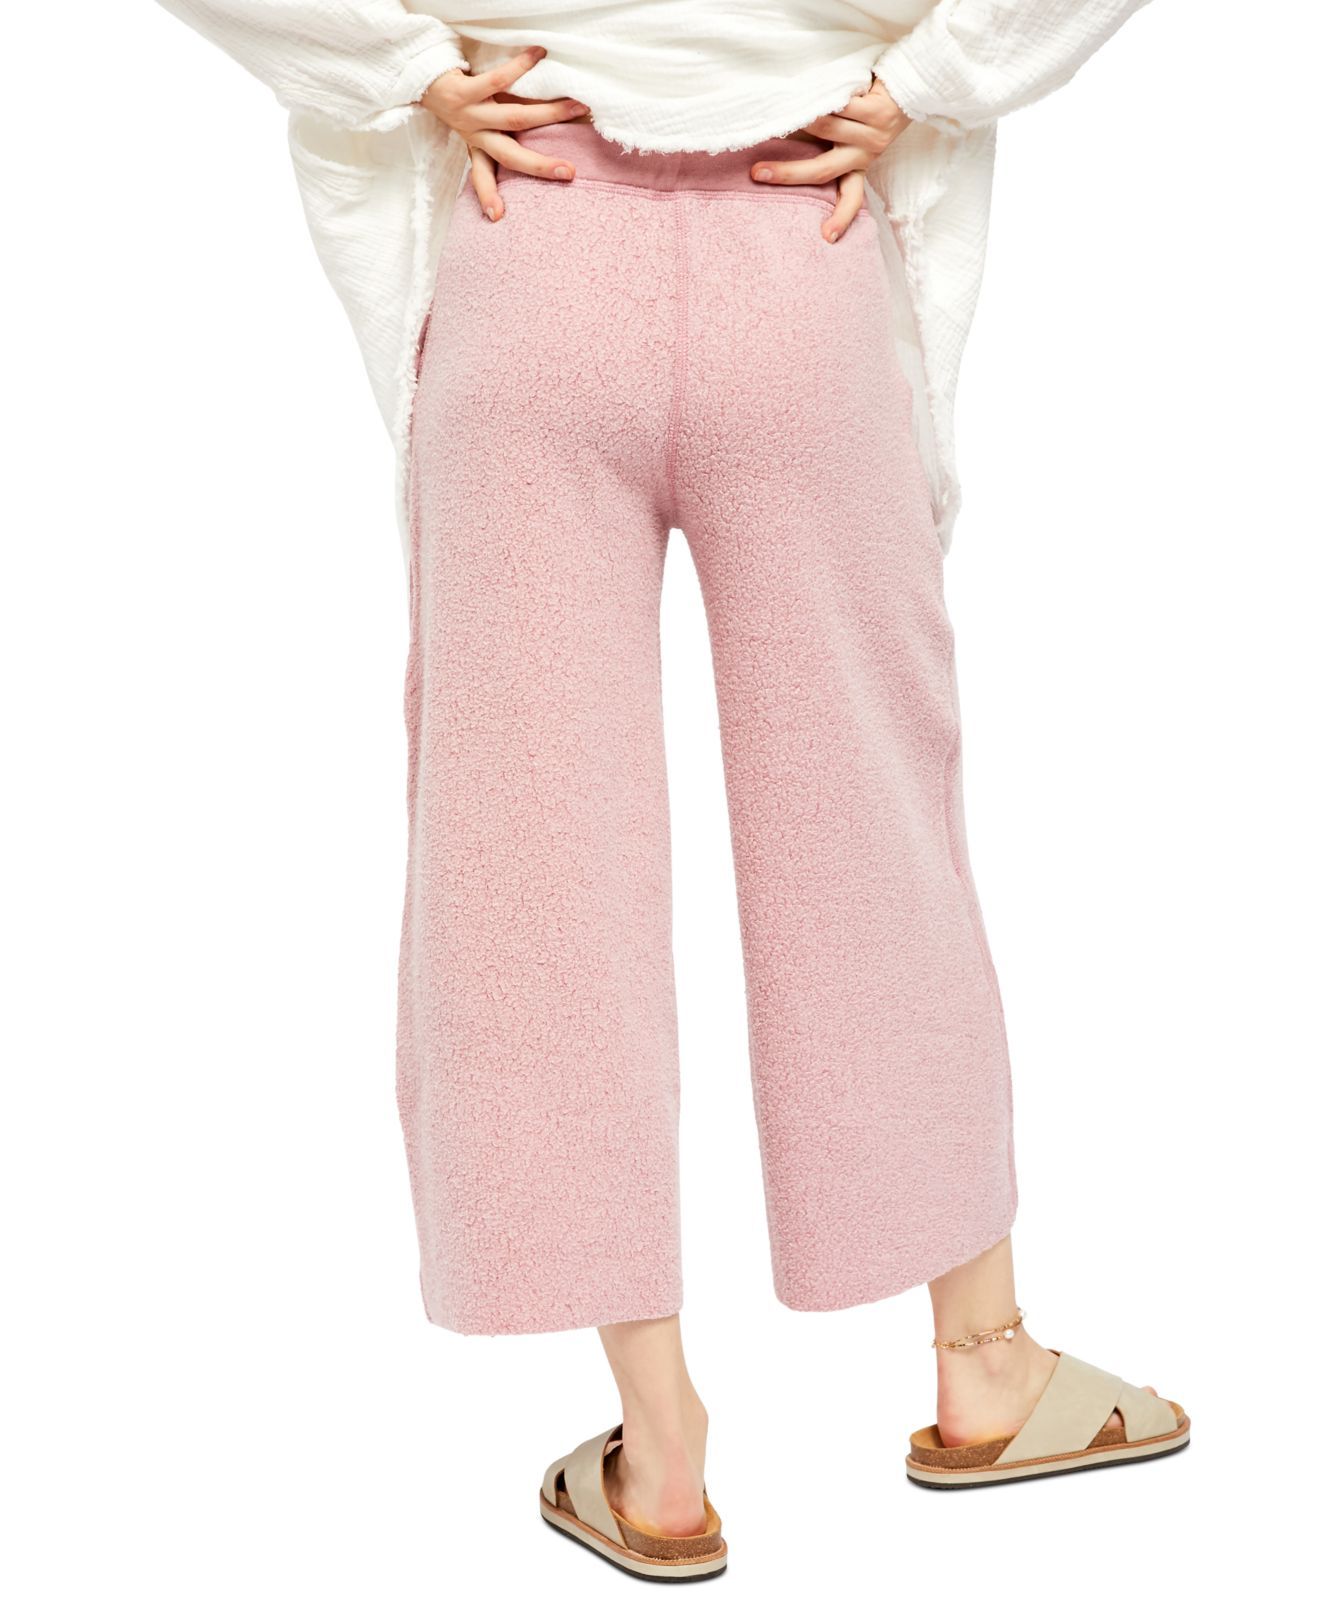 Color: Pinks Size Type: Regular Bottoms Size (Women's): M Height Type: regular Type: Pants Style: Sweatpants Occasion: Casual Rise: Mid Inseam: 22 Material: Polyester Stretch: YES